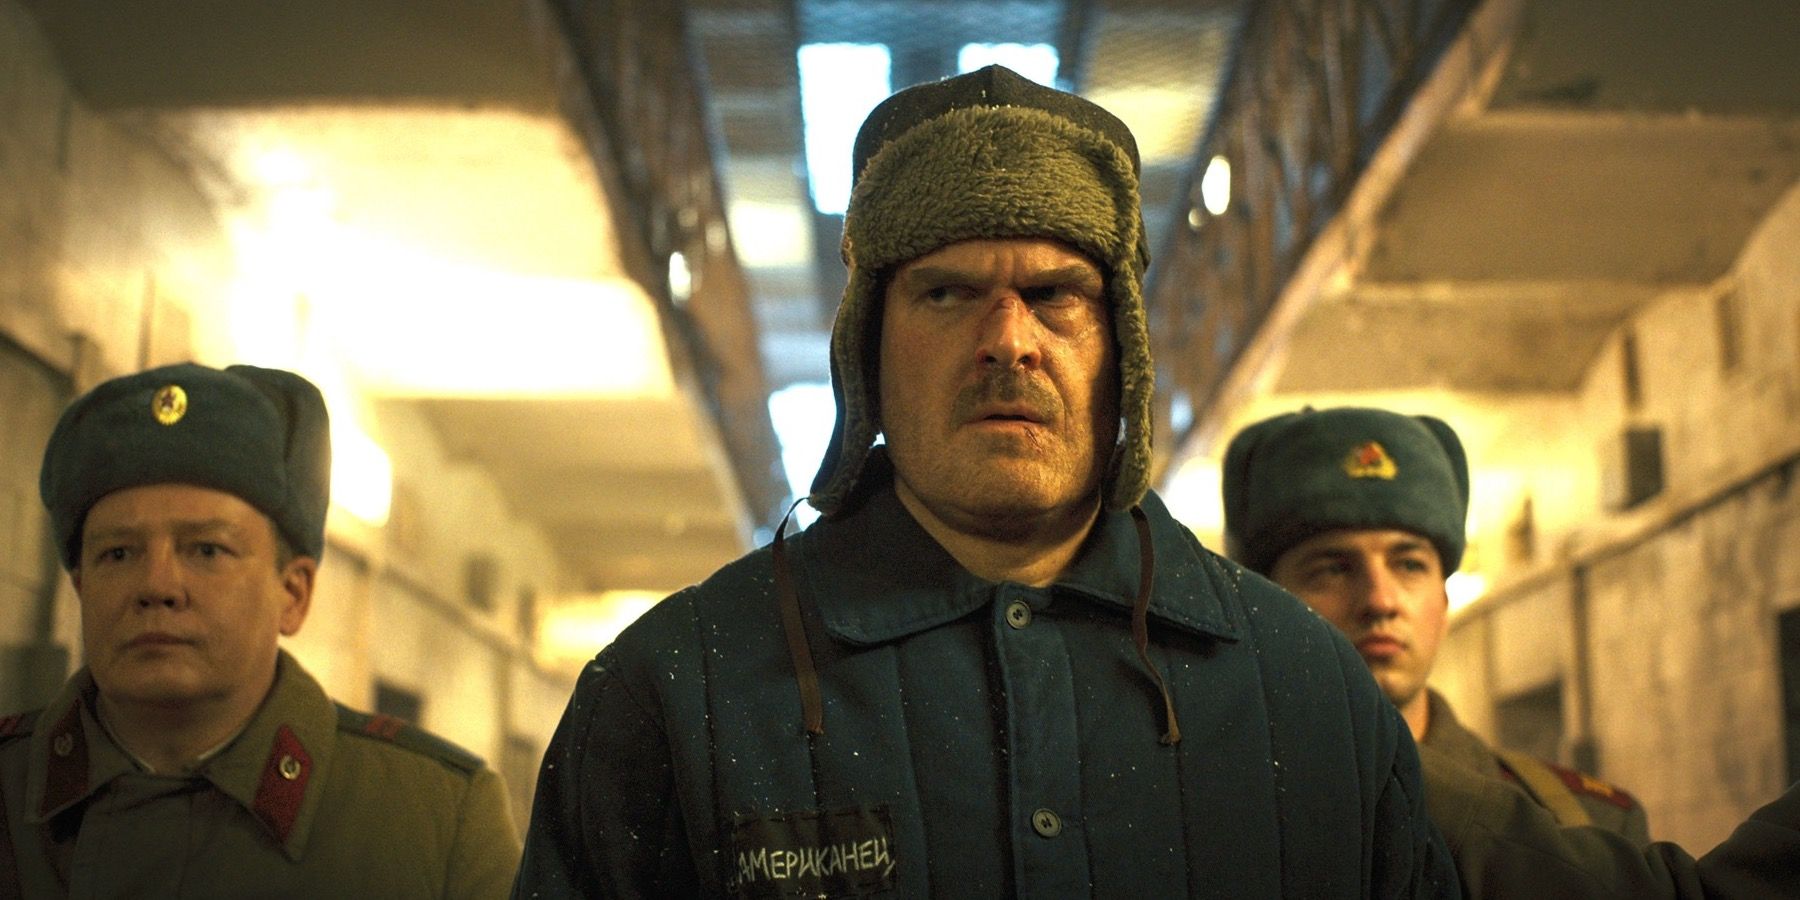 Stranger Things Hopper Guarded by Russians